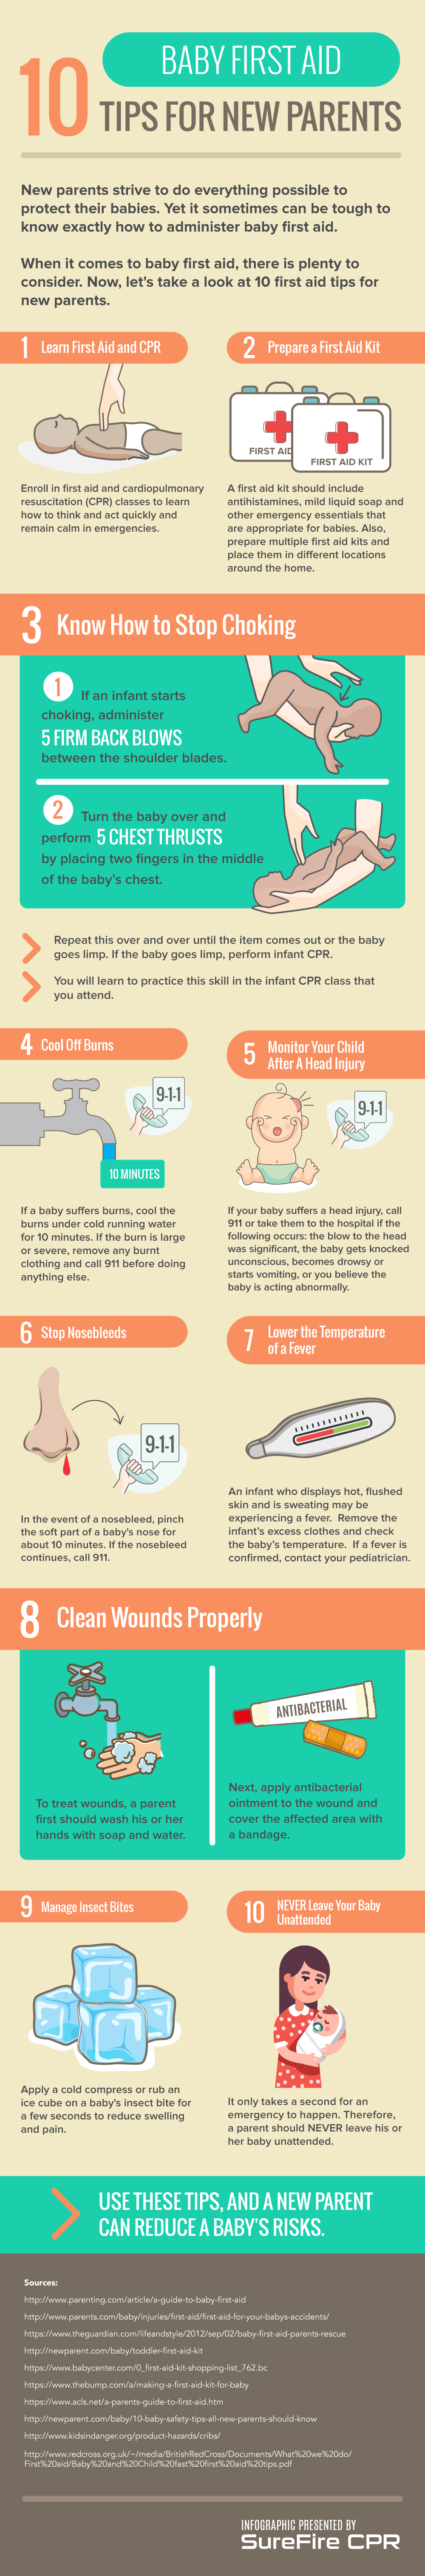 Baby First Aid: 10 Tips for New Parents